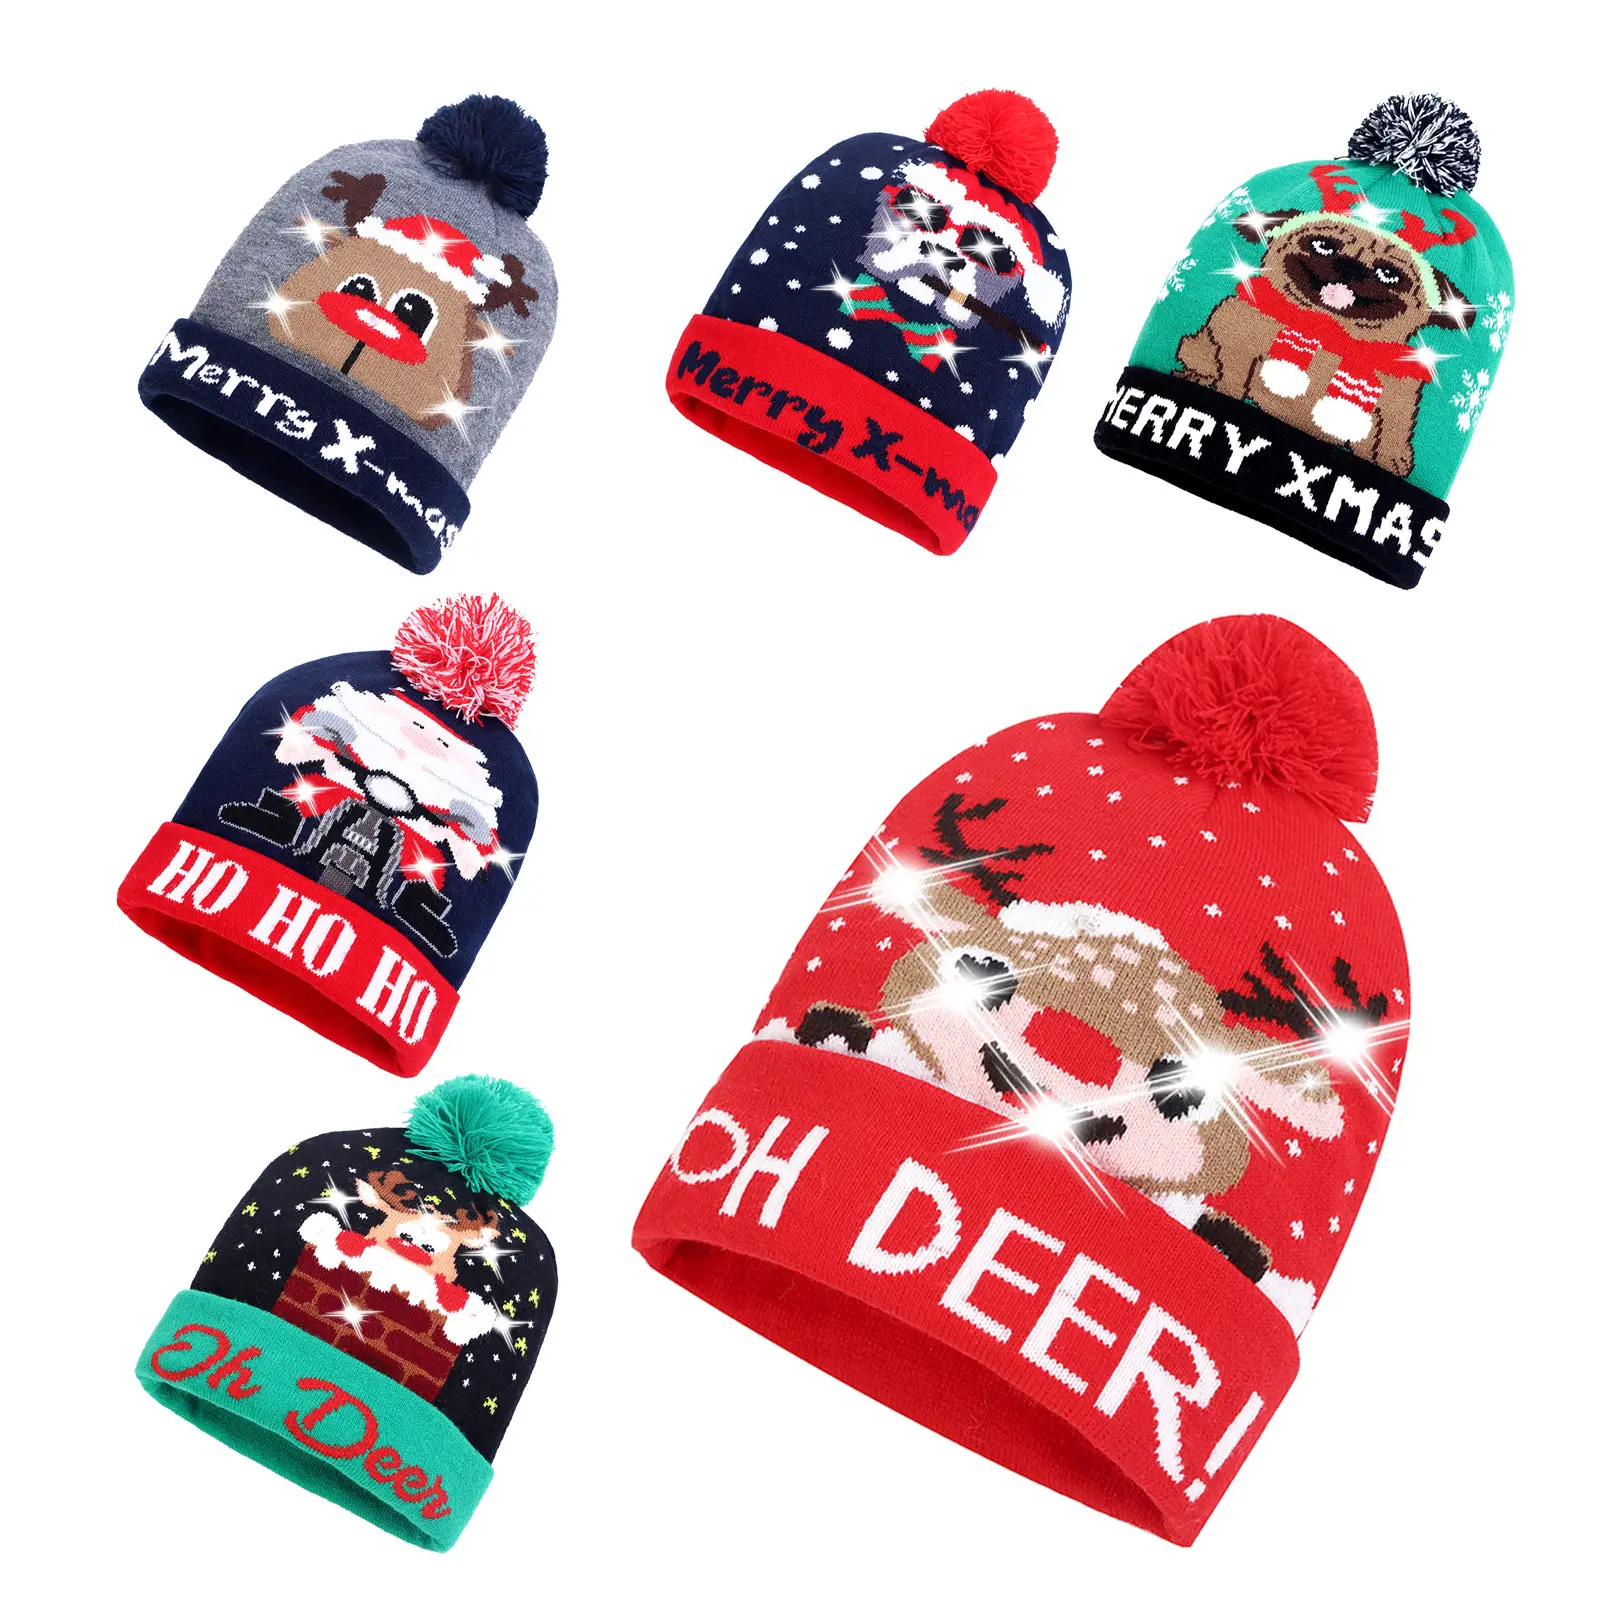 LED Light Up Hat Beanie Knit Cap LED Xmas Christmas Hat Beanie Unisex Winter Snow Hat Sweater Ugly Holiday Part Beanie Cap